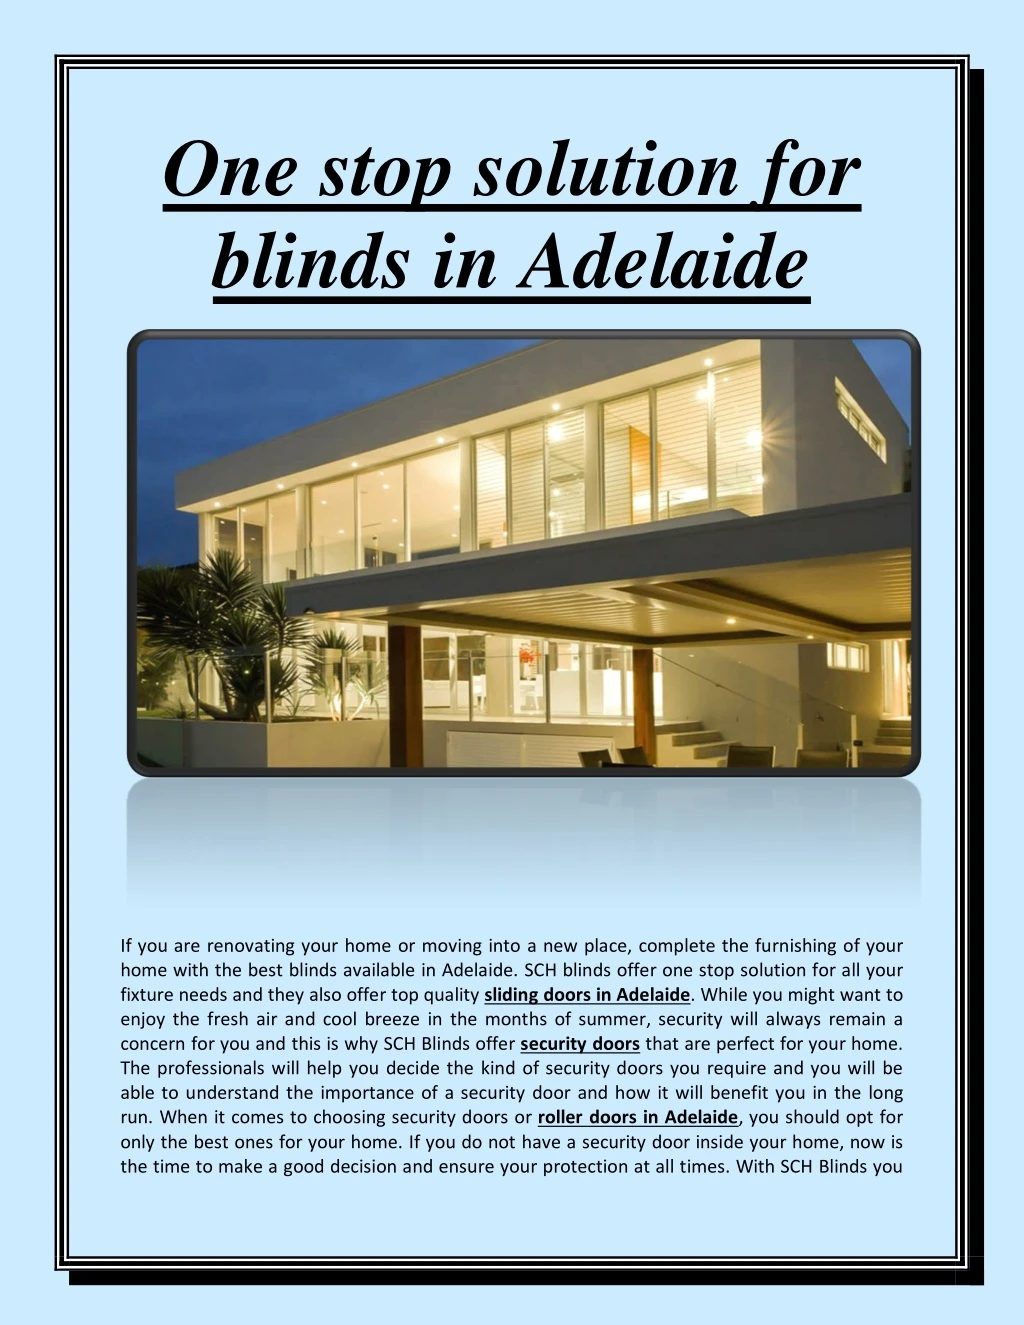 one stop solution for blinds in adelaide